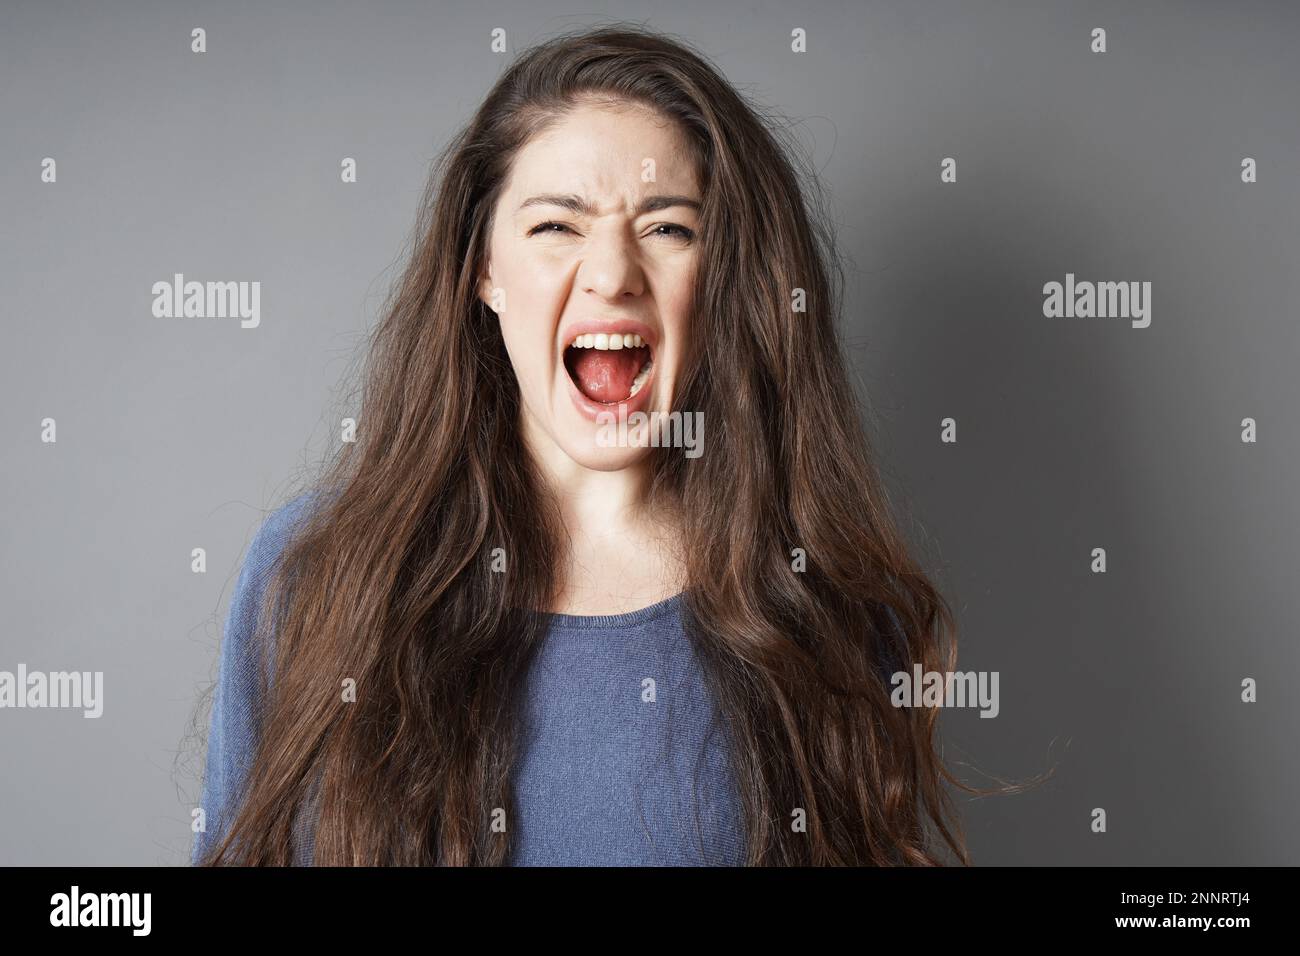 angry hysterical young woman screaming and shouting - gray background with copy space Stock Photo